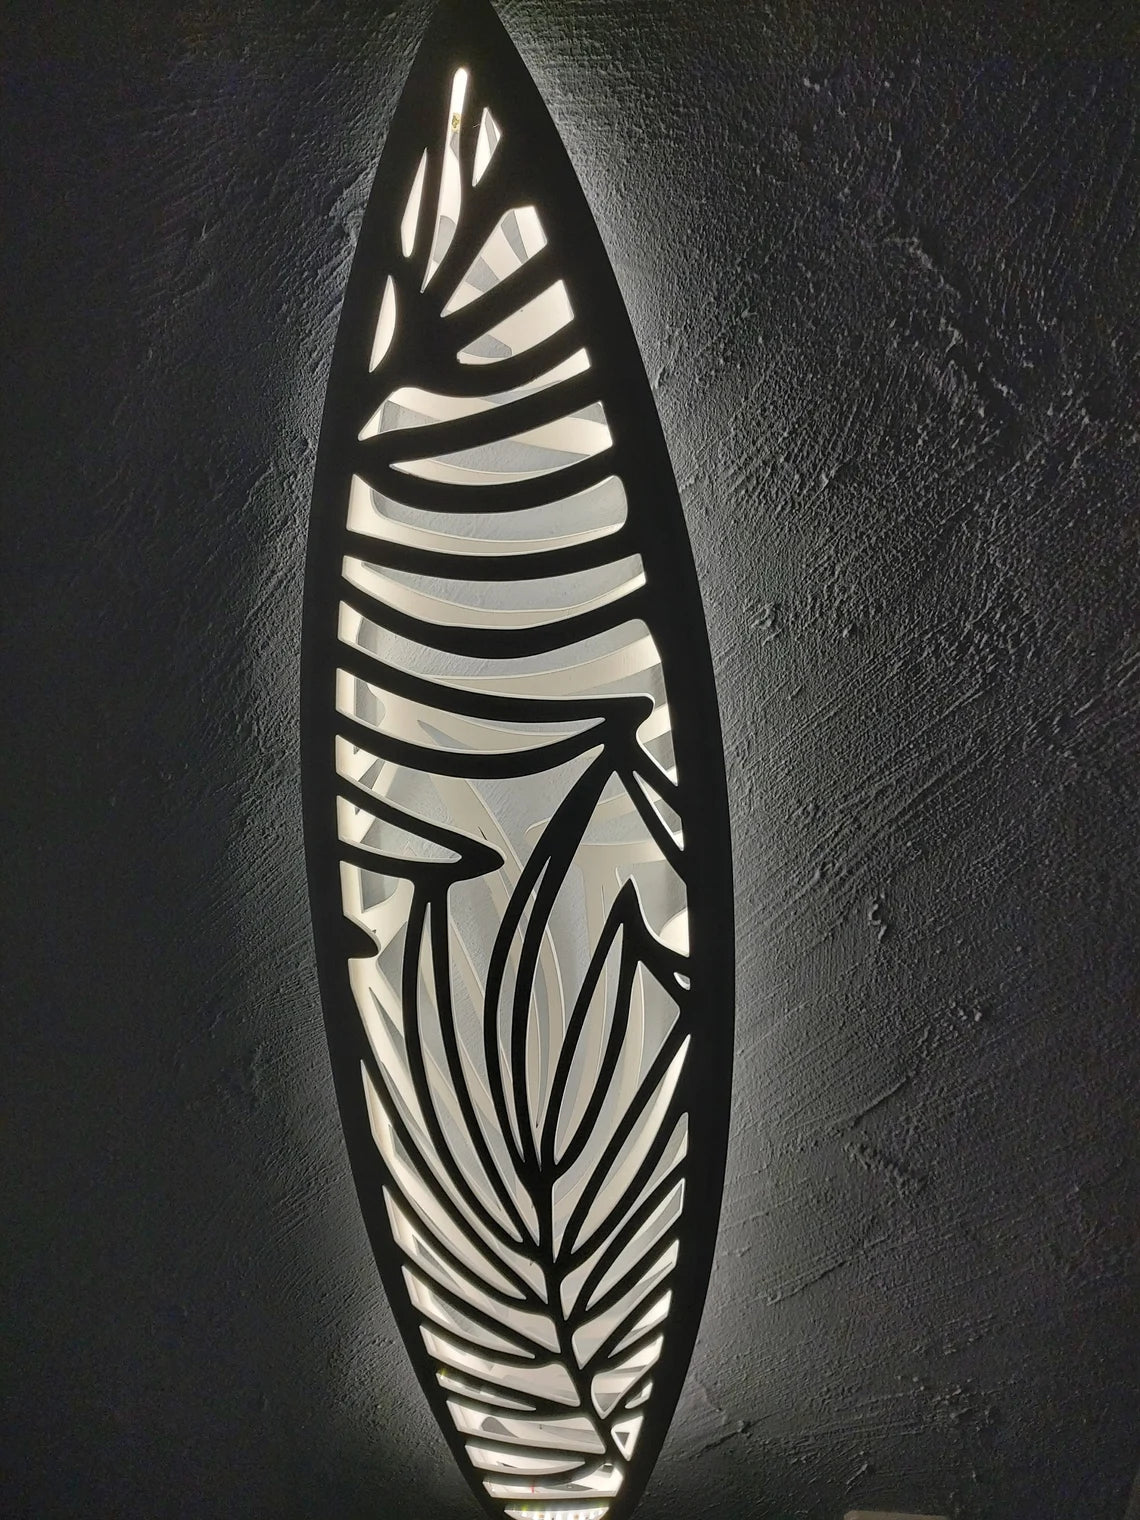 Surfboard Inspired Wall LED Light: White Wooden Lighting Fixture with Botanical Pattern for Accent Home Decor